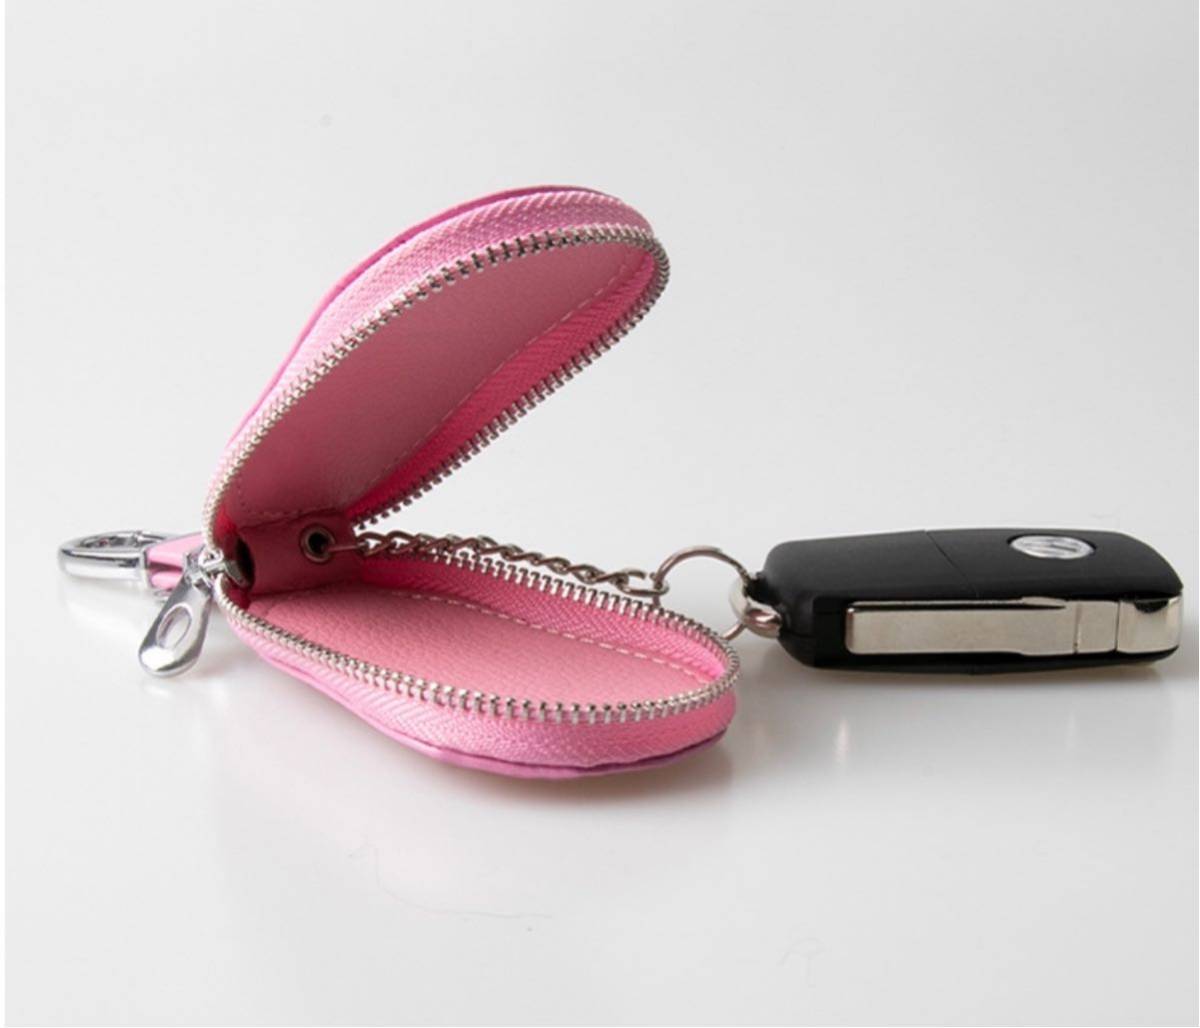  Hello Kitty key case Hello kitty key case automobile remote control key case leather zipper key cover .. pink 